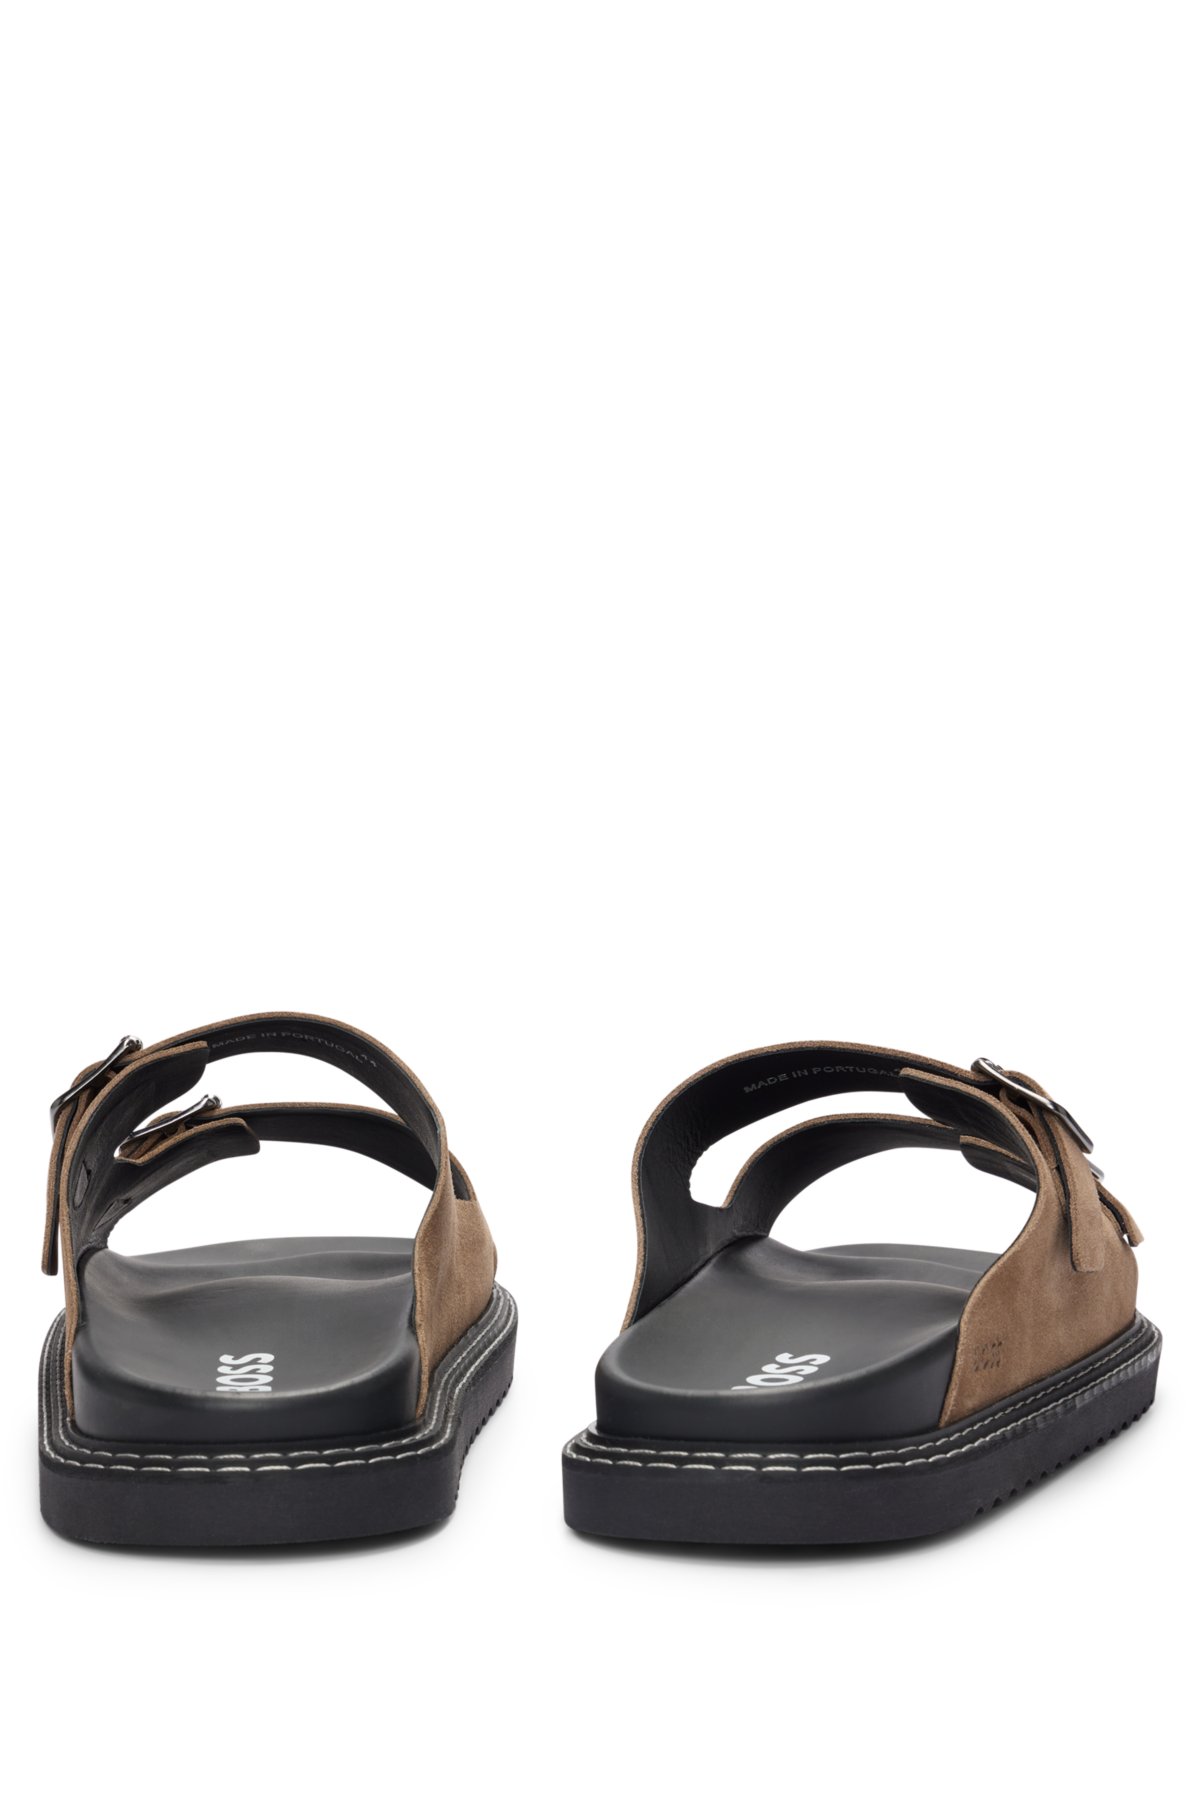 Twin-strap sandals with suede uppers and buckle closure, Beige